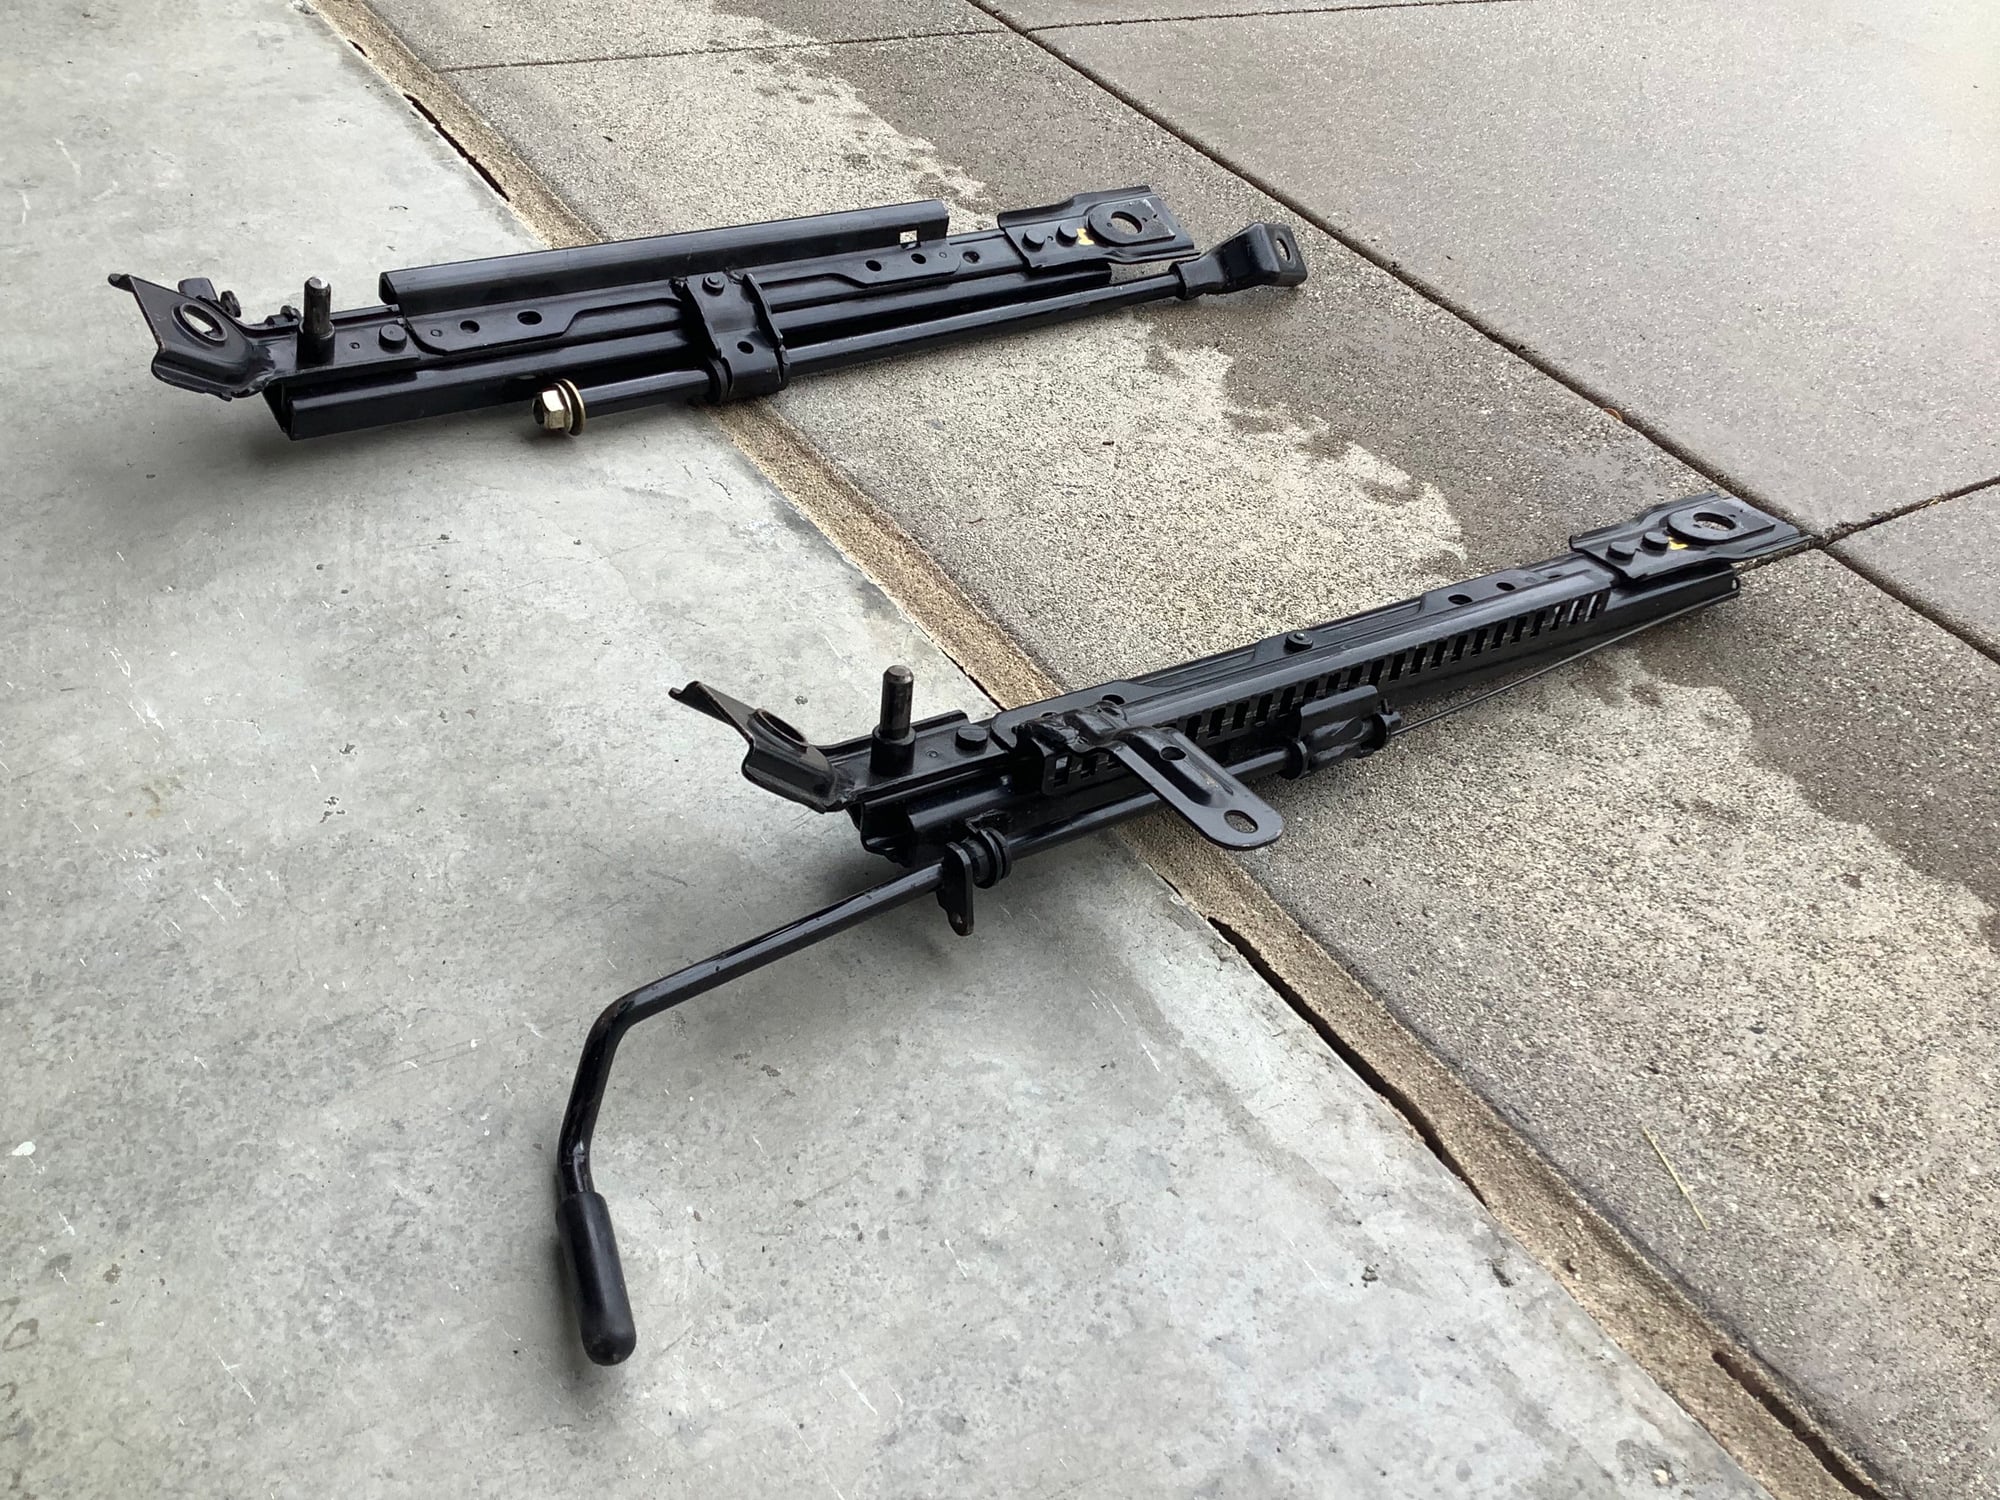 Interior/Upholstery - 93 94 95 OEM Mazda RX7 FD3S Manual Seat Track Rail Slider - Left (Driver) Side - Used - 1993 to 1995 Mazda RX-7 - Mission Viejo, CA 92694, United States